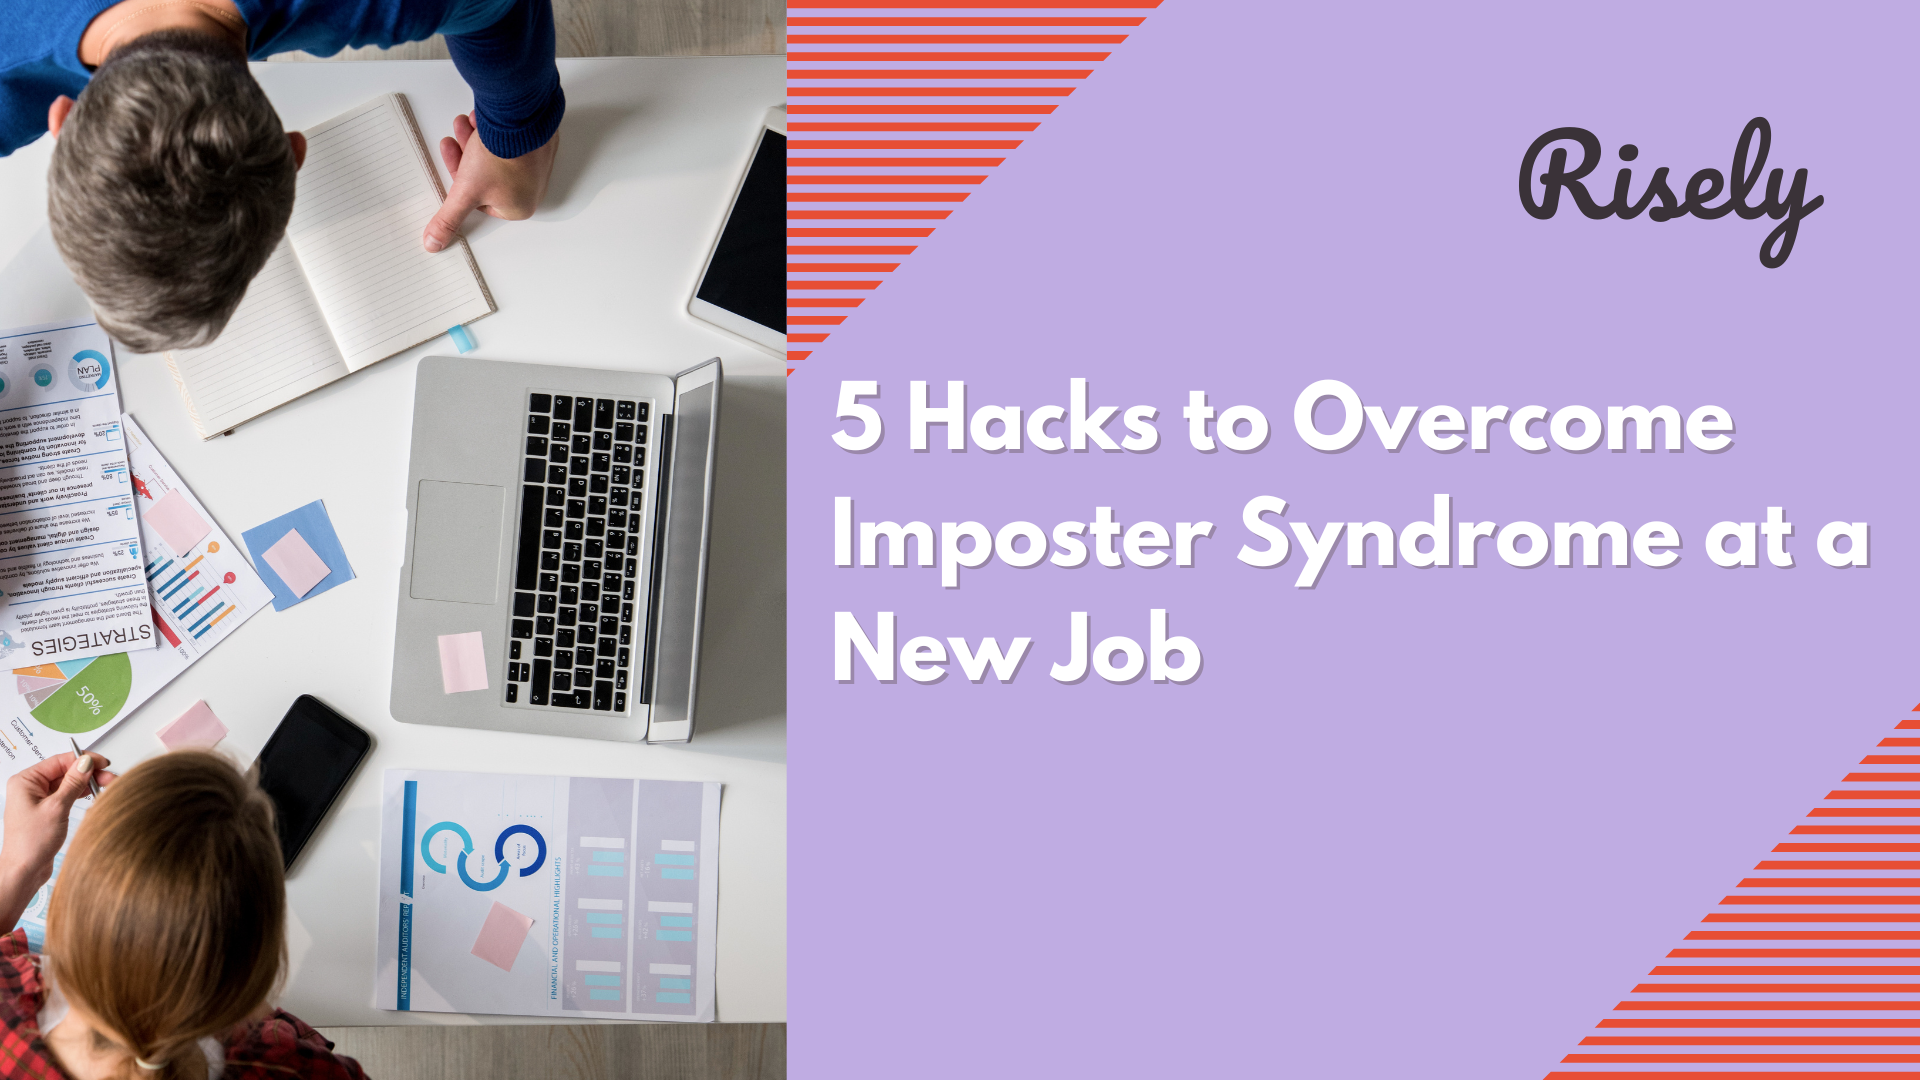 5 Hacks to Overcome Imposter Syndrome at a New Job